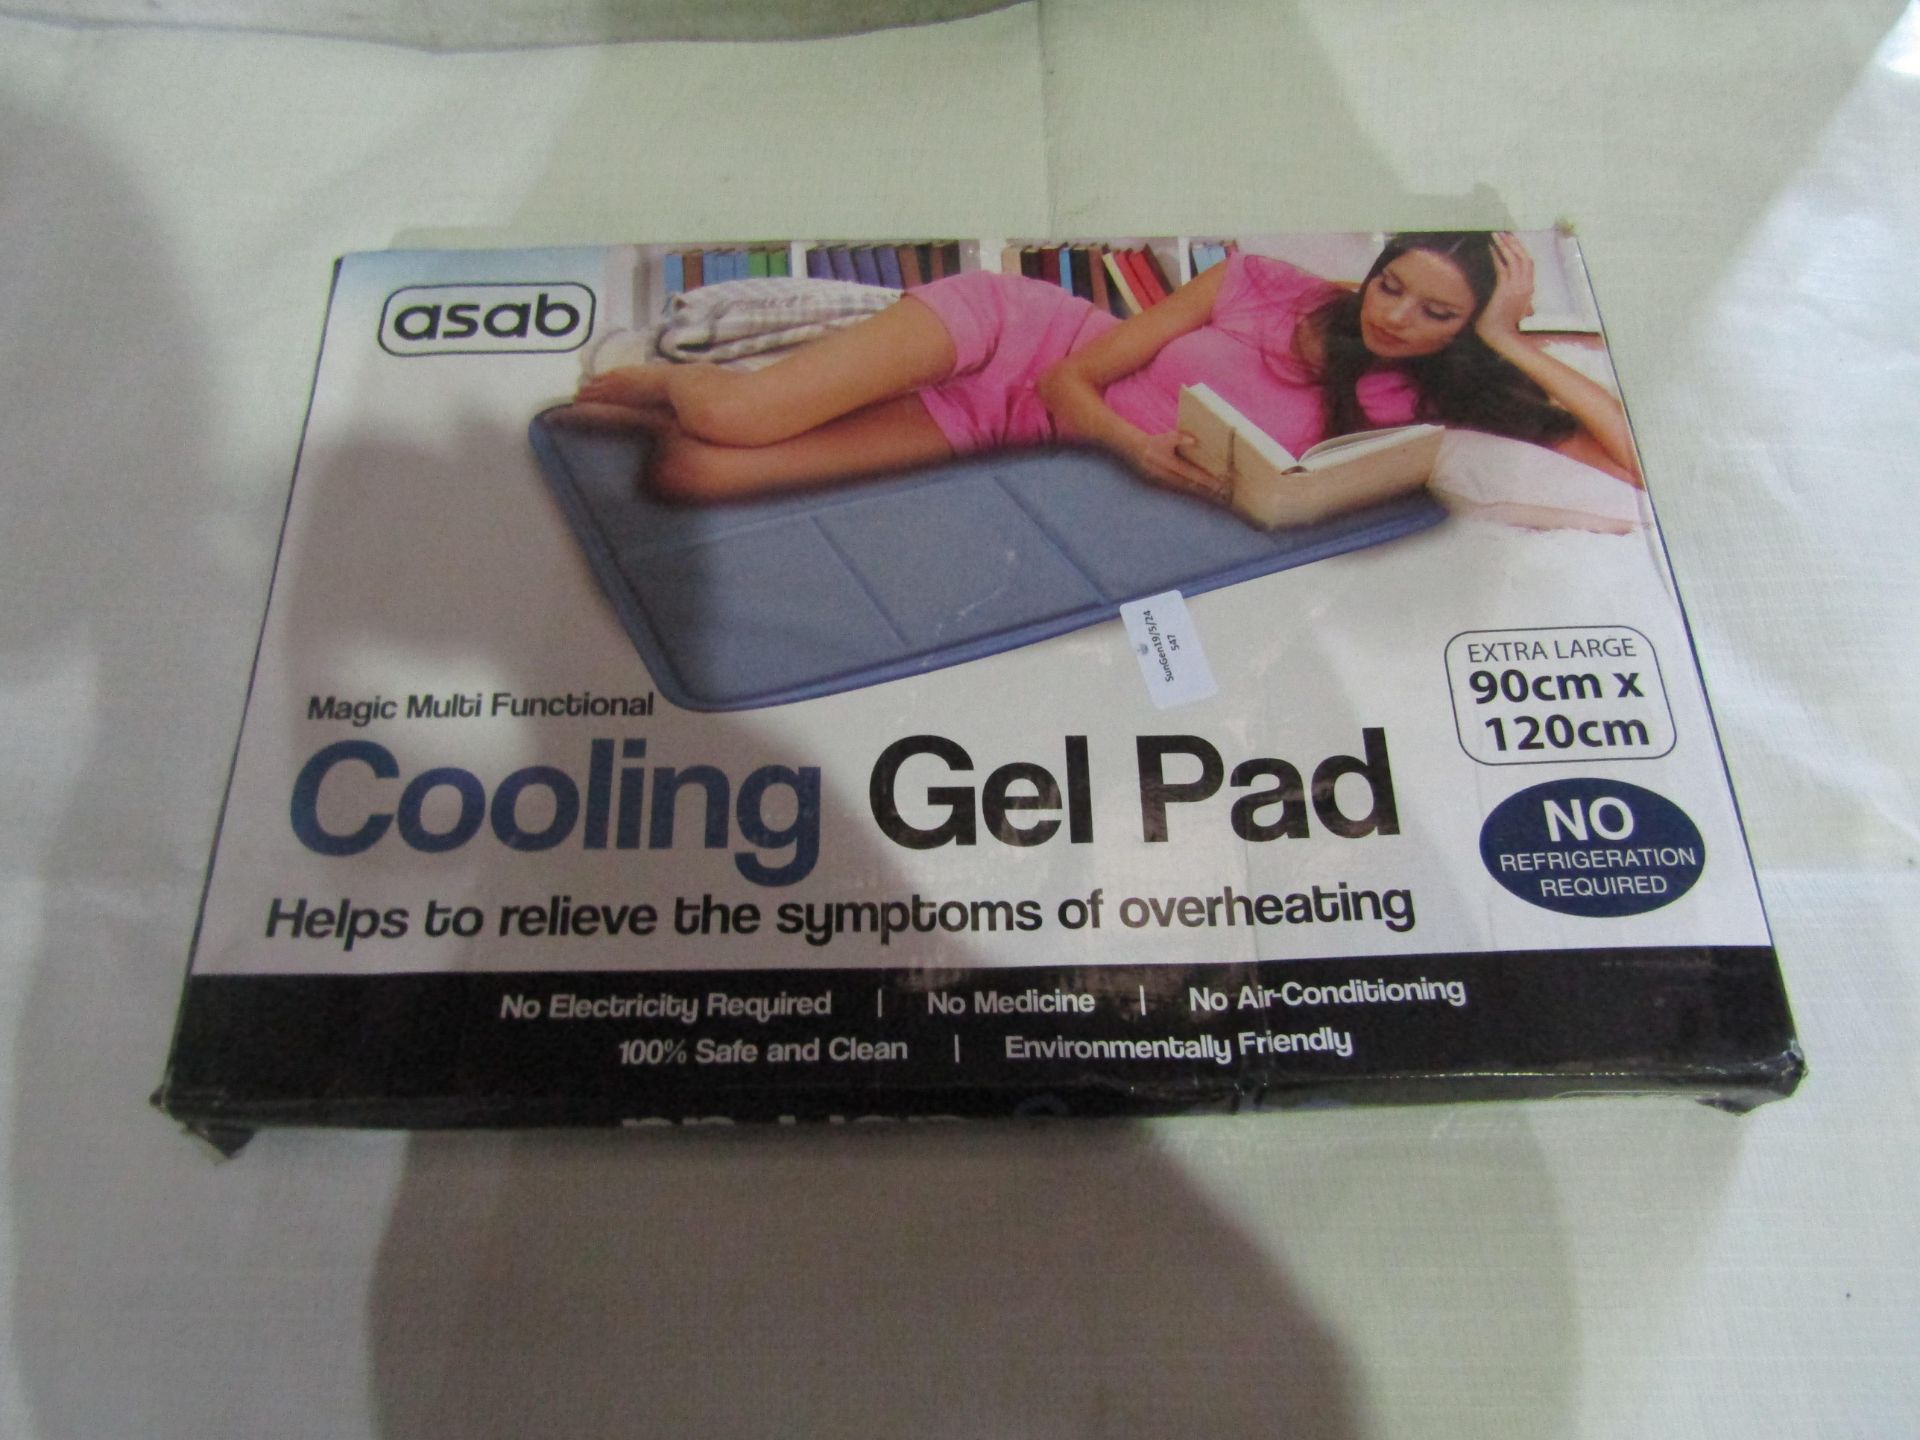 Asab Magic Multi Functional Cooling Gel Pad, Size: Extra Large 90x120cm - Unchecked & Boxed.